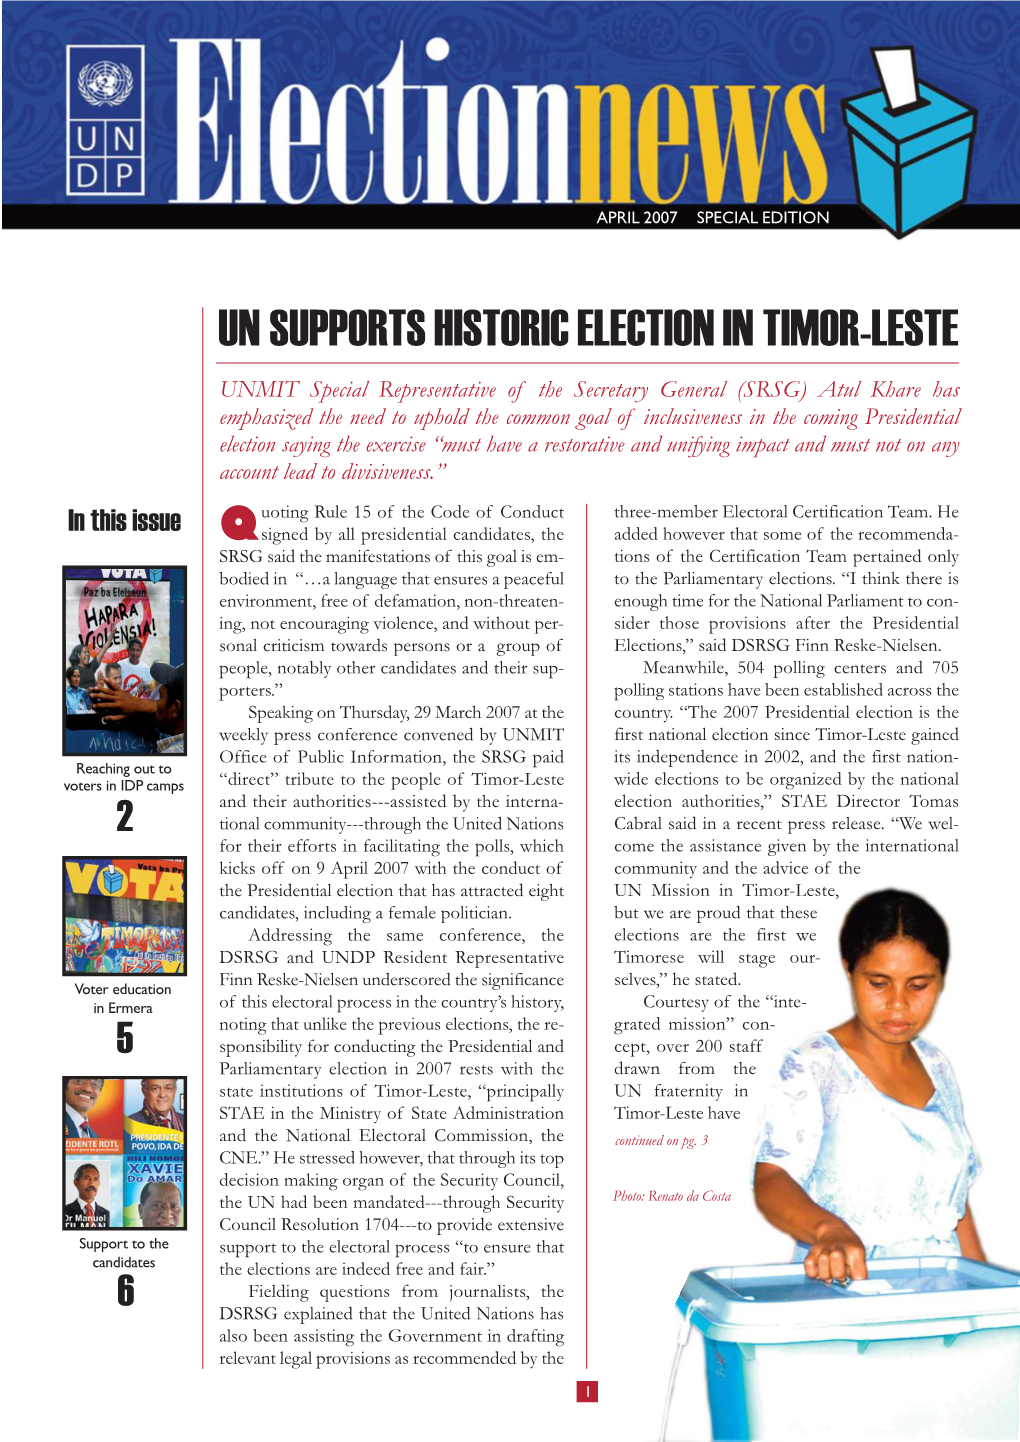 Un Supports Historic Election in Timor-Leste